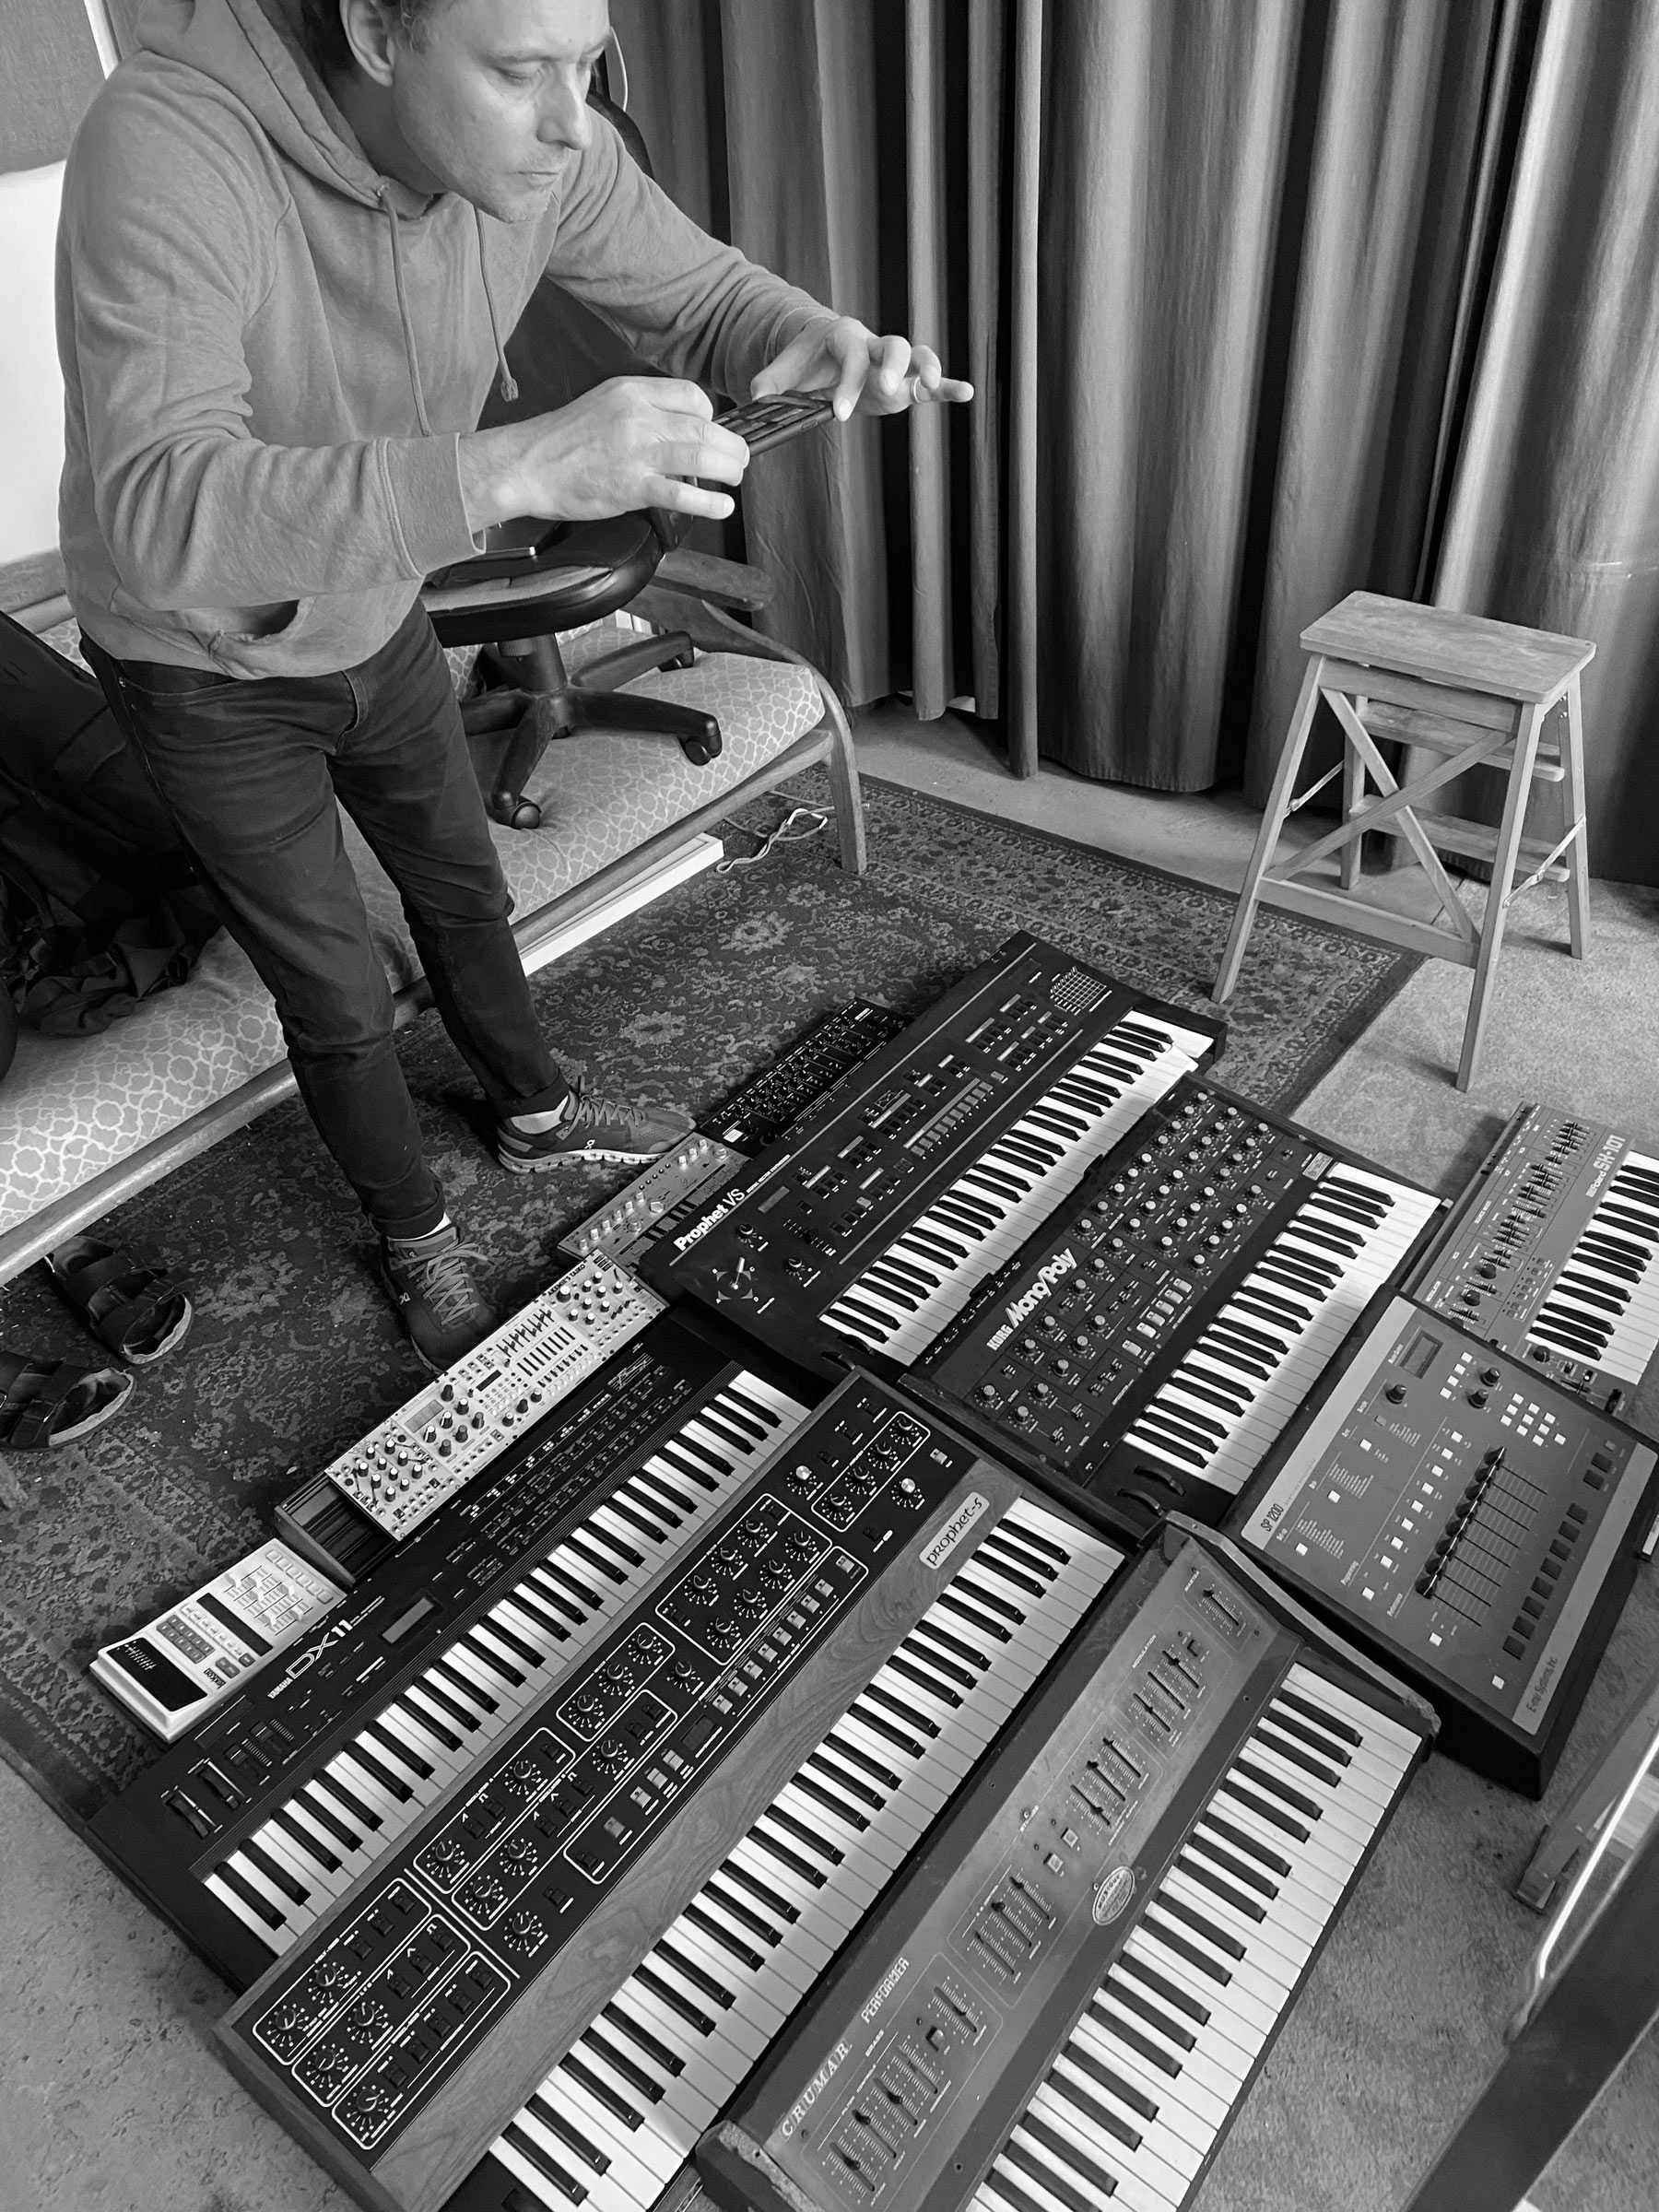 A photograph of James Paterson taking a photo of Stephen Ramsay's synthesizer collection